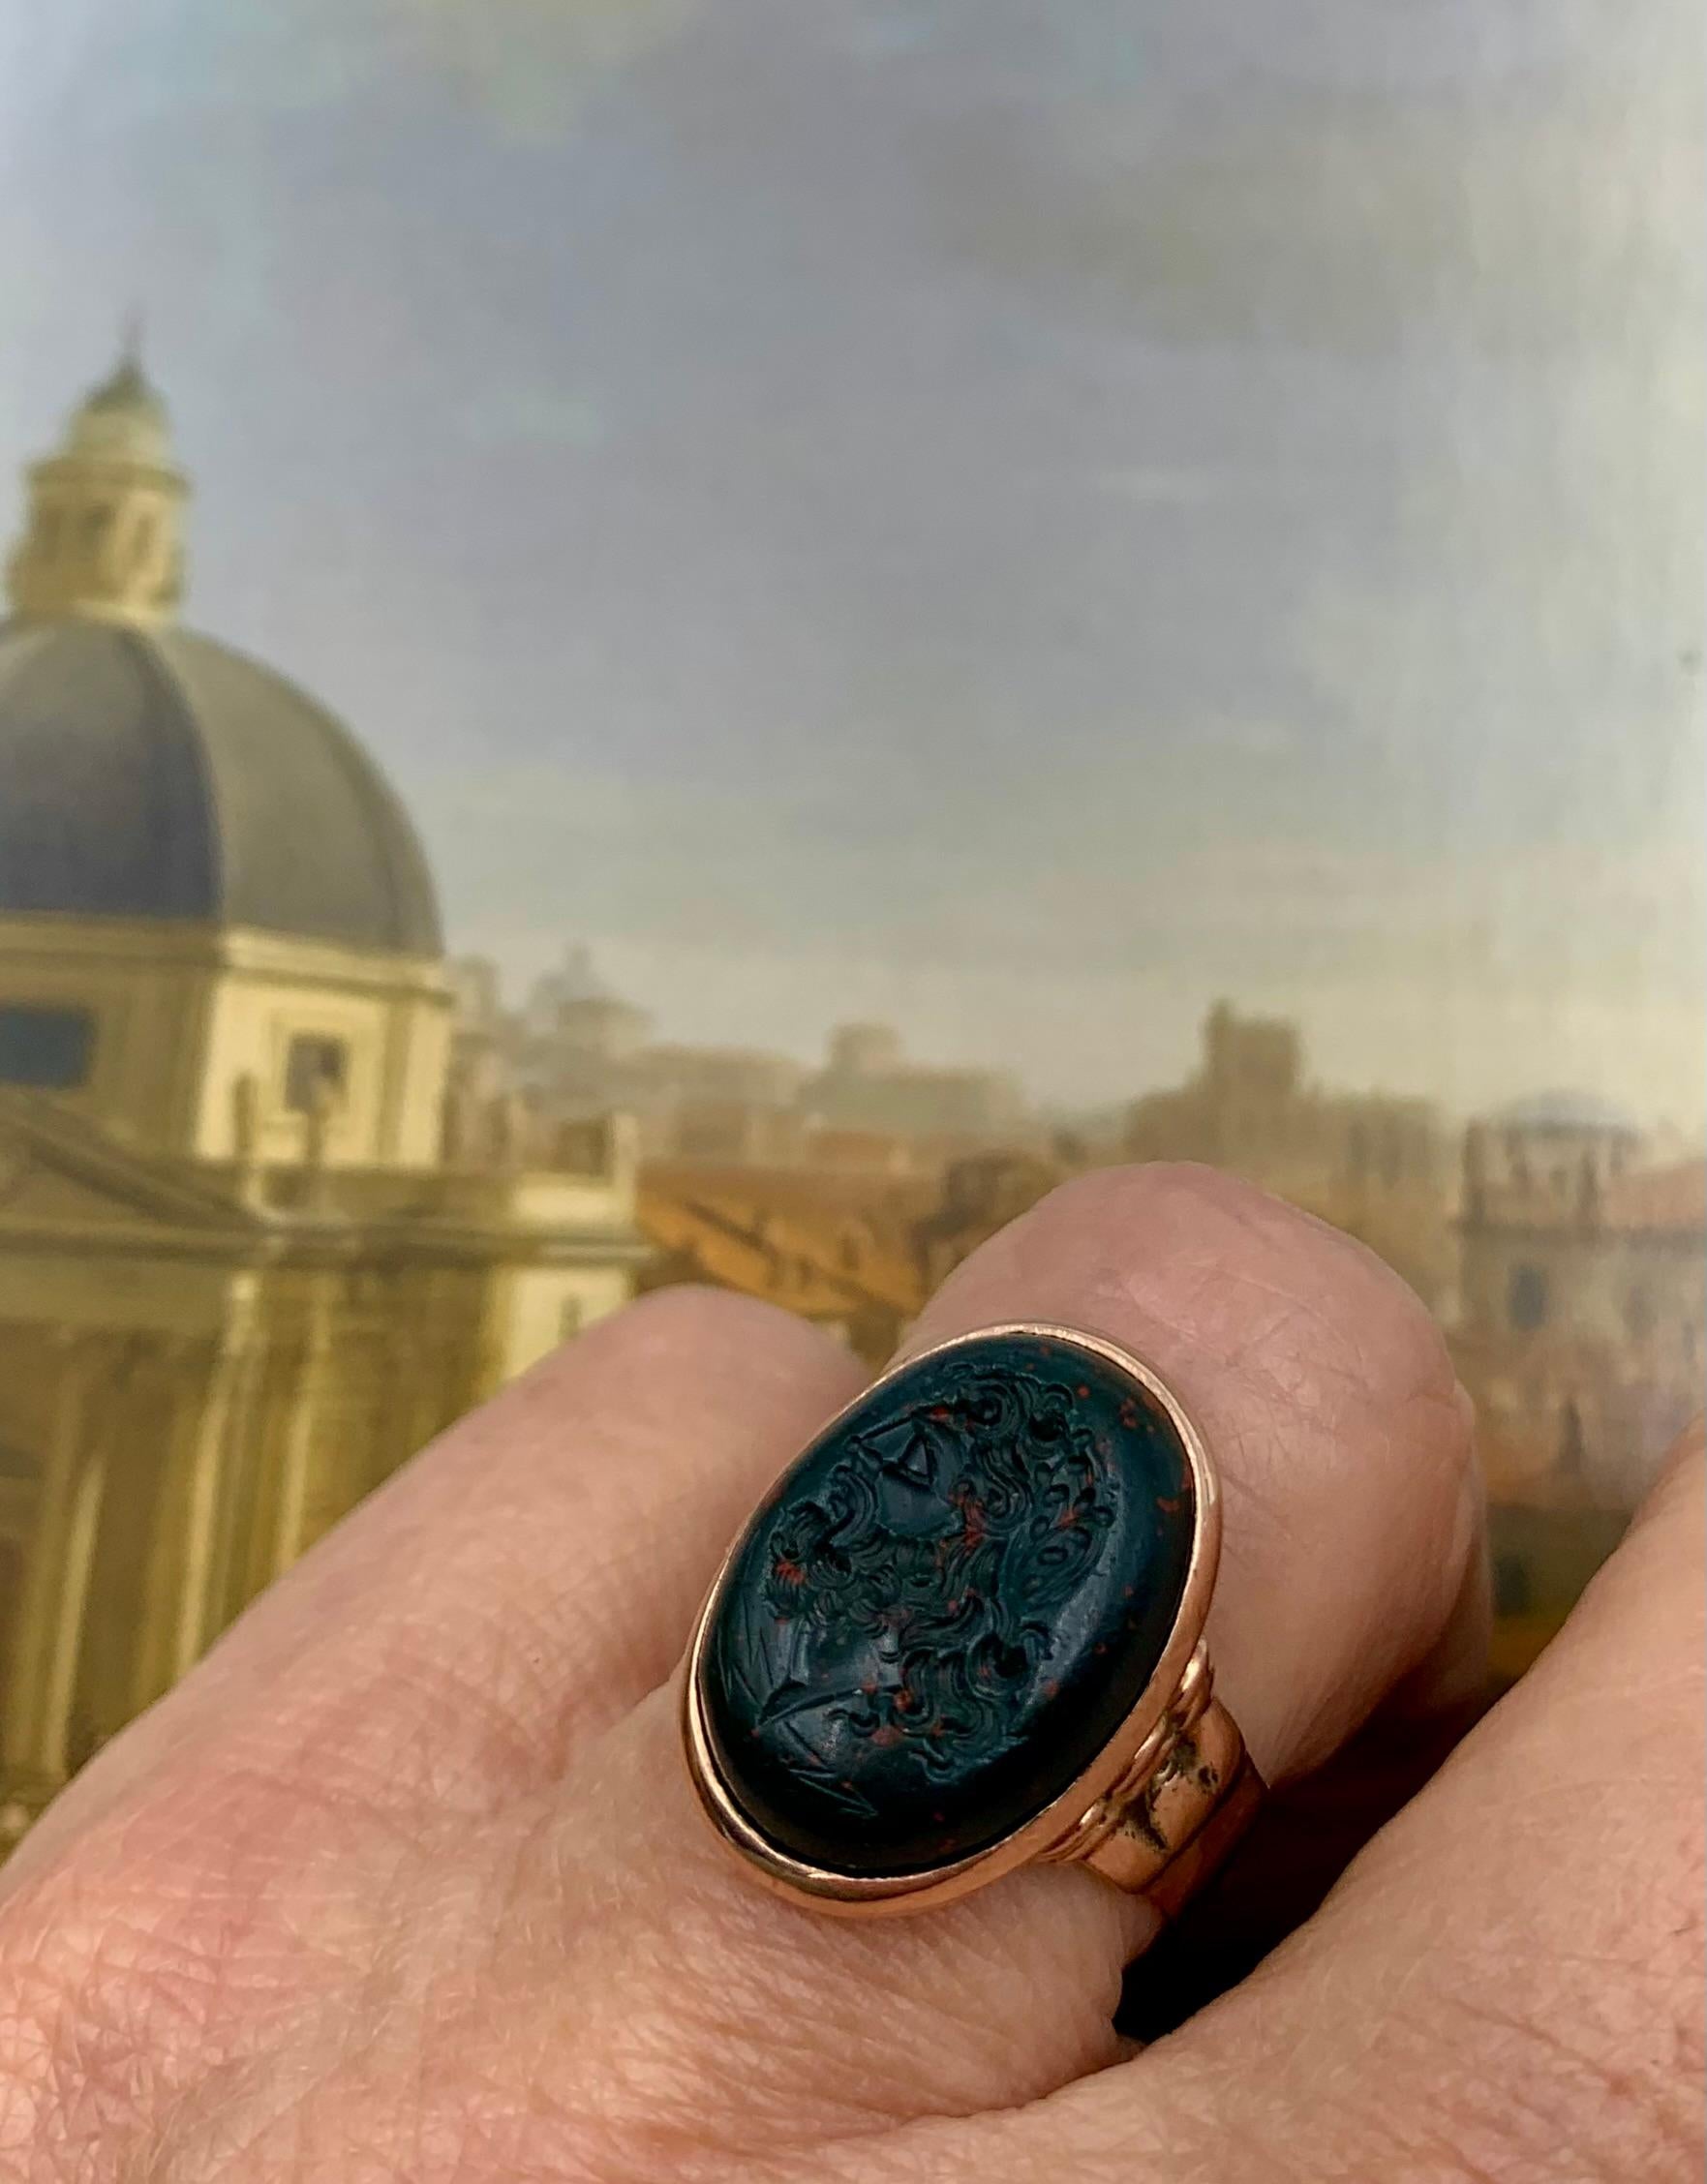 Fine Georgian period early 19th century bloodstone and 14K Rose gold intaglio signet ring depicting Zeus with bolts of lightning. The oval shaped bloodstone with rich natural red inclusions is cabochon shaped rather than flat, as are most intaglio